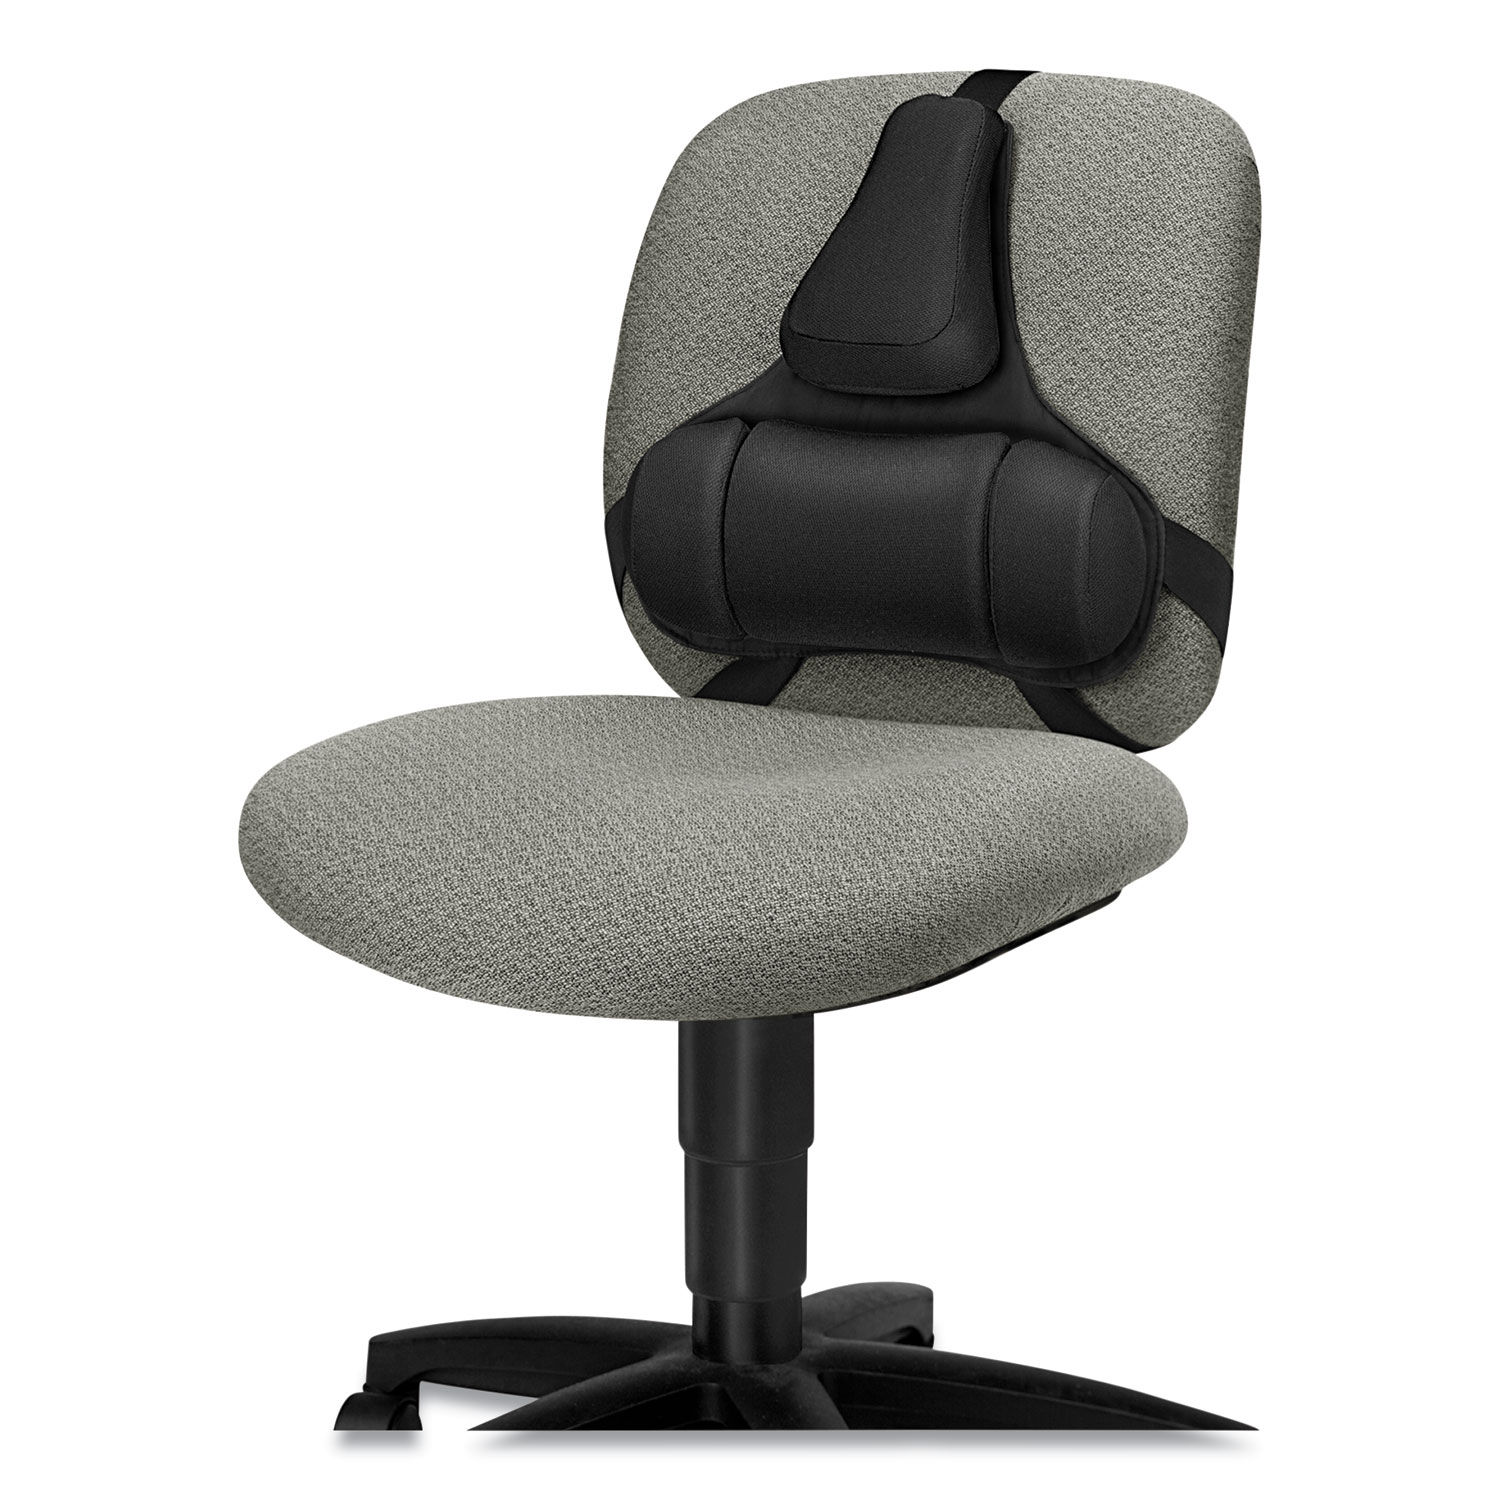 Memory Foam Back Support with Microban